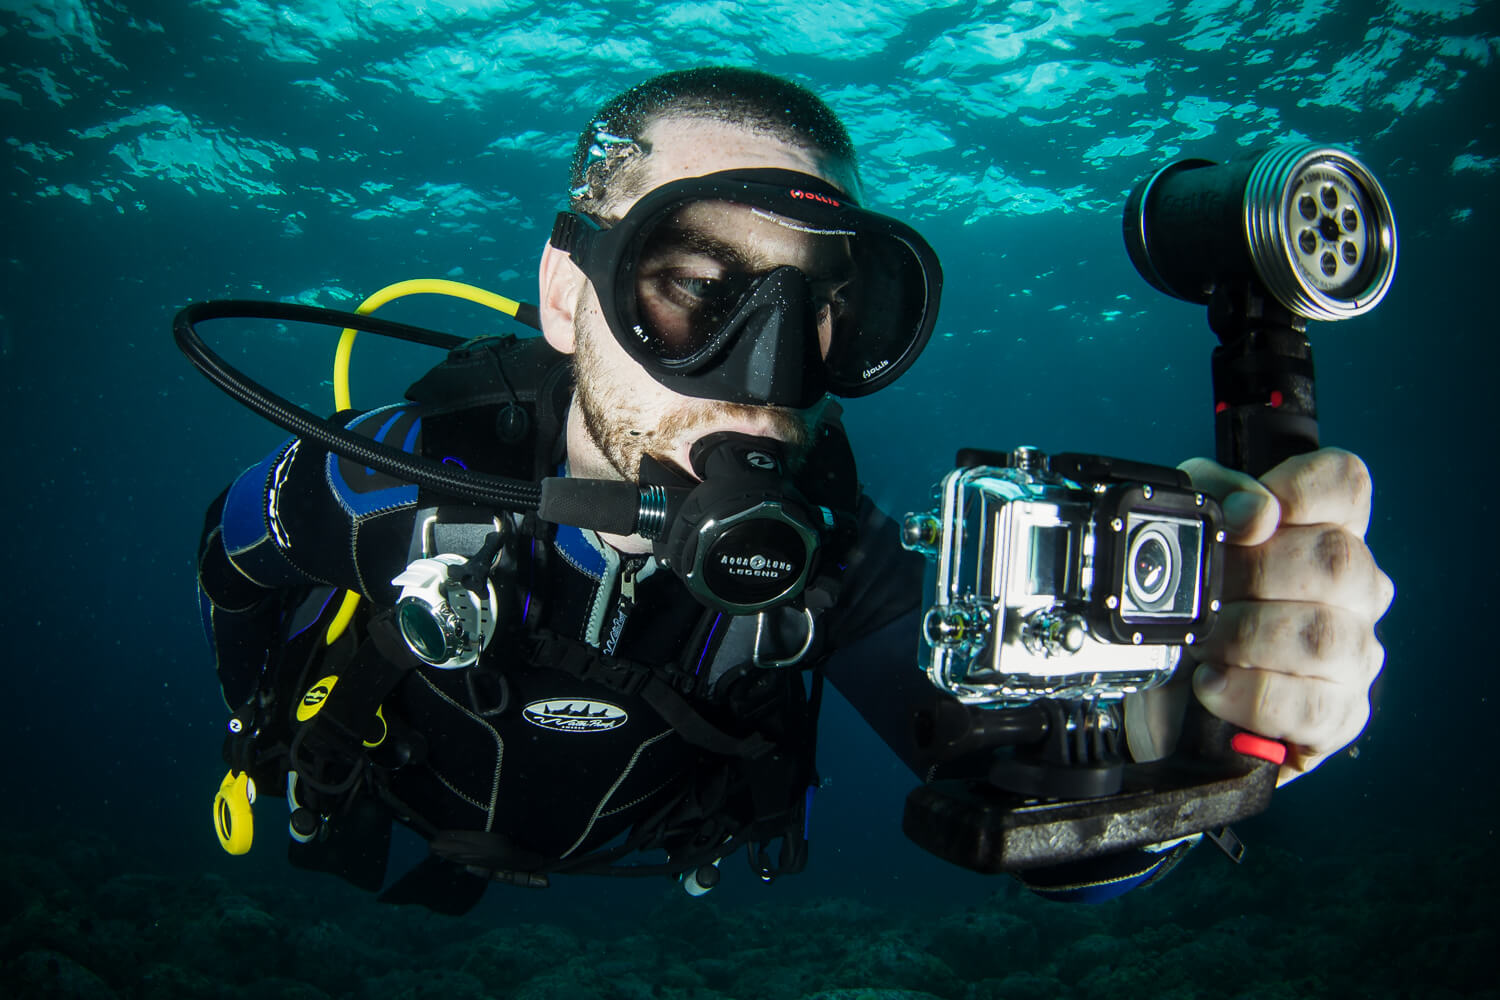 Things to Keep in Mind Before Diving Underwater with Your GoPro Without a Case